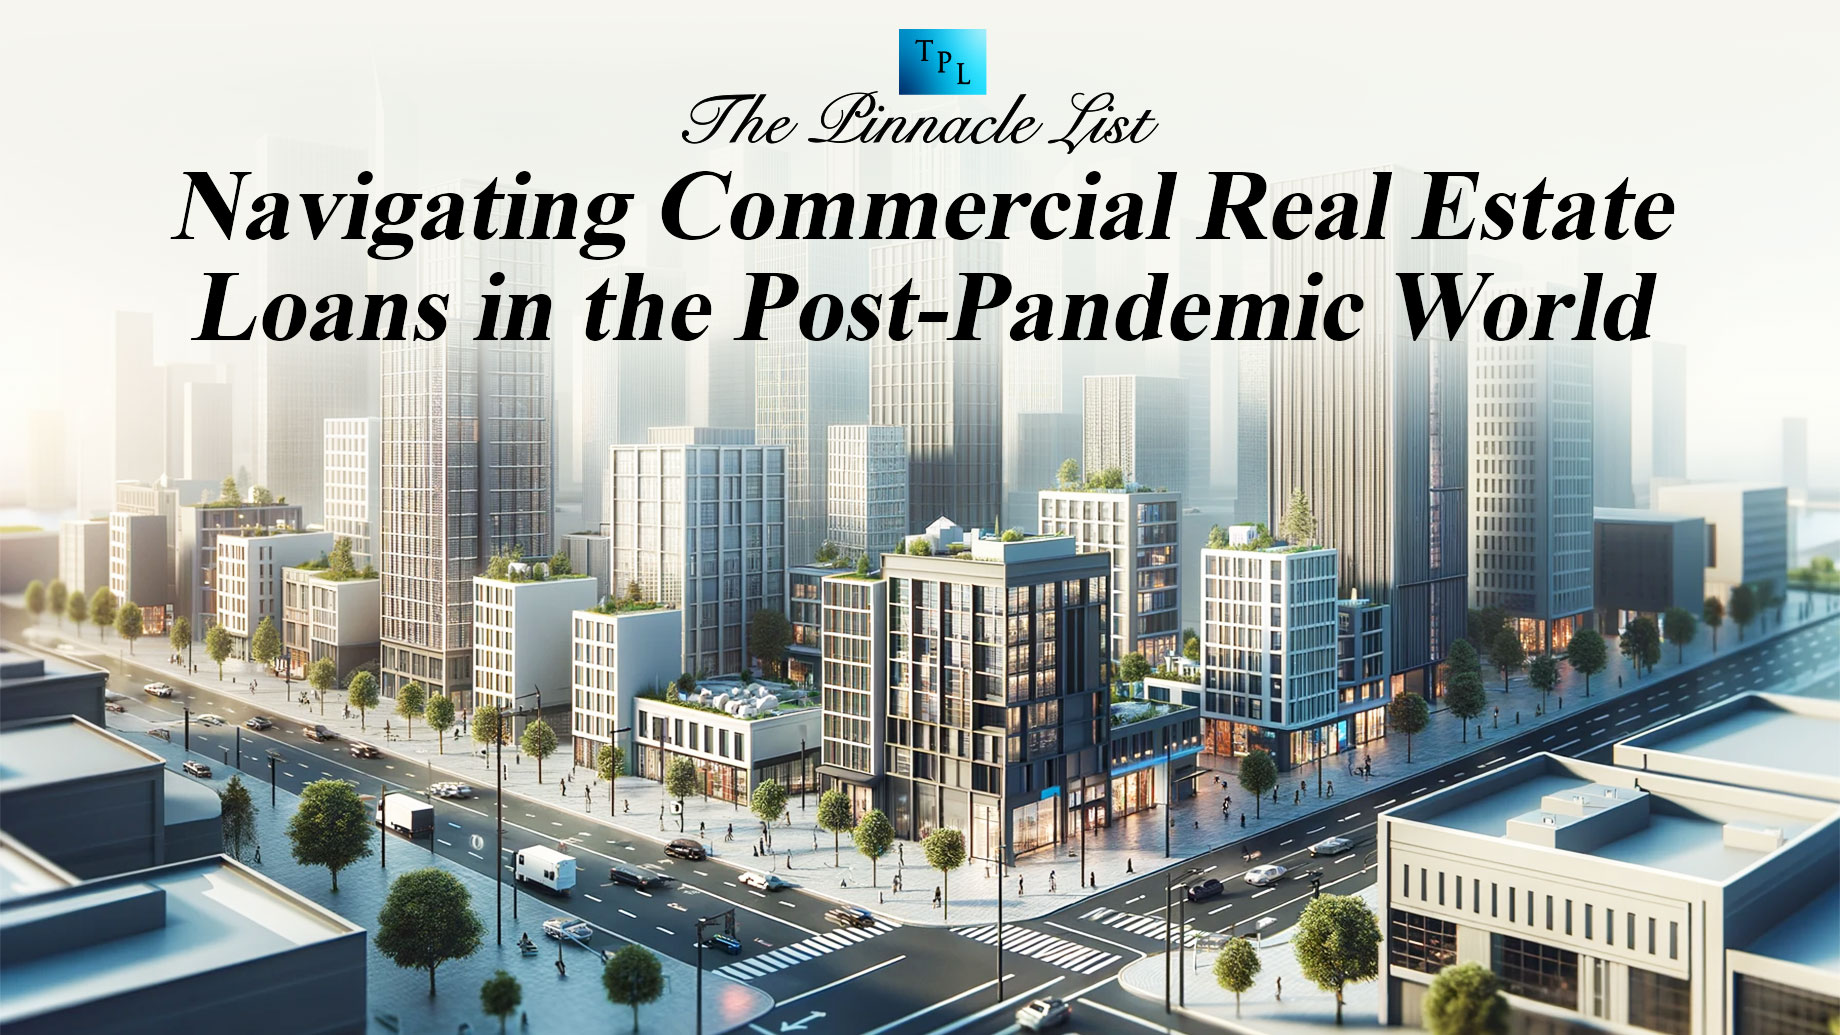 Navigating Commercial Real Estate Loans in the Post-Pandemic World